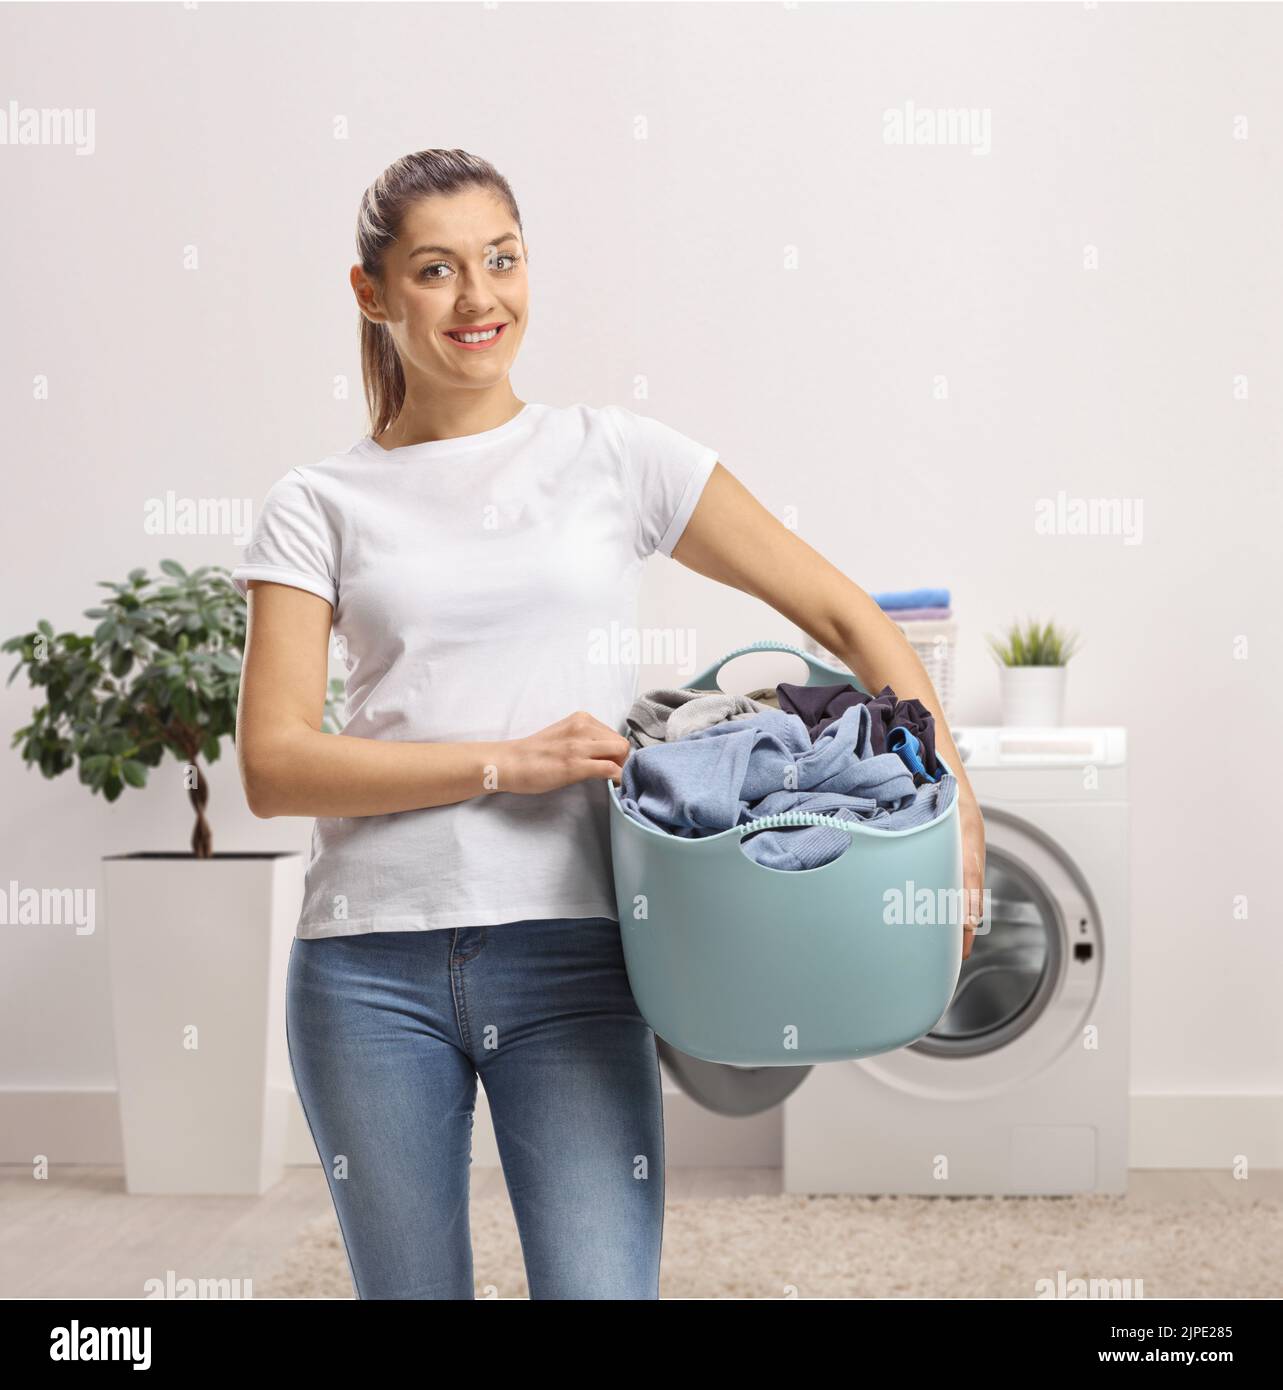 Young female holding a laundry basket inside a bathroom Stock Photo